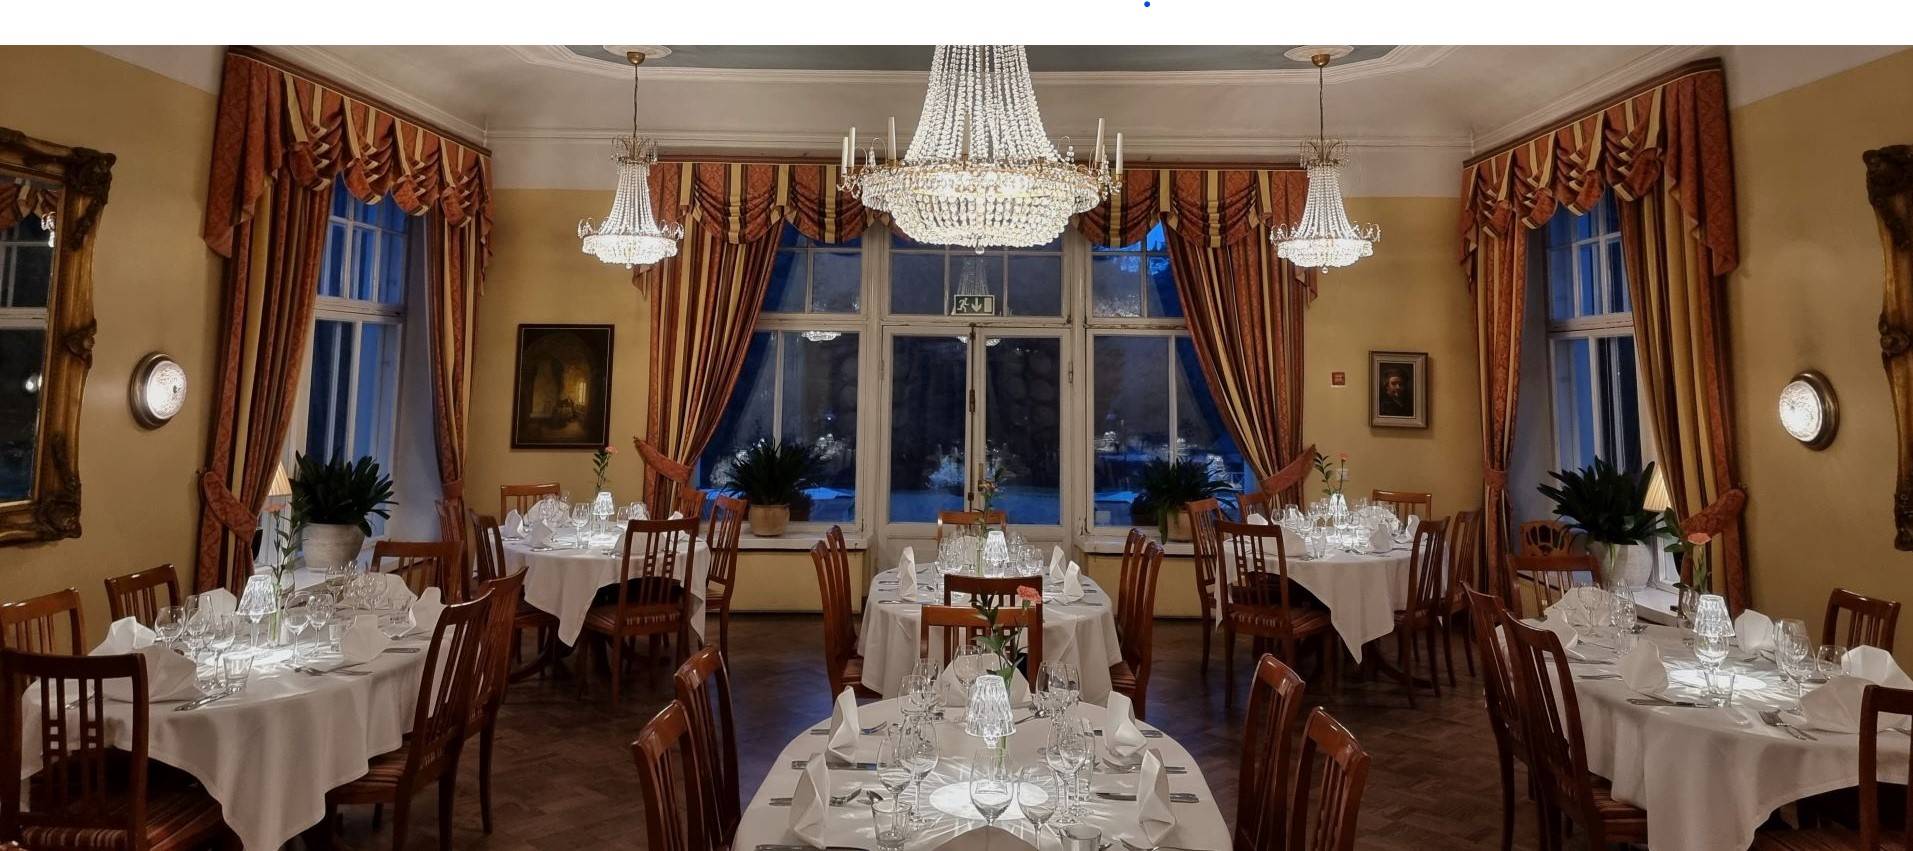 Main house's banquet facilities include